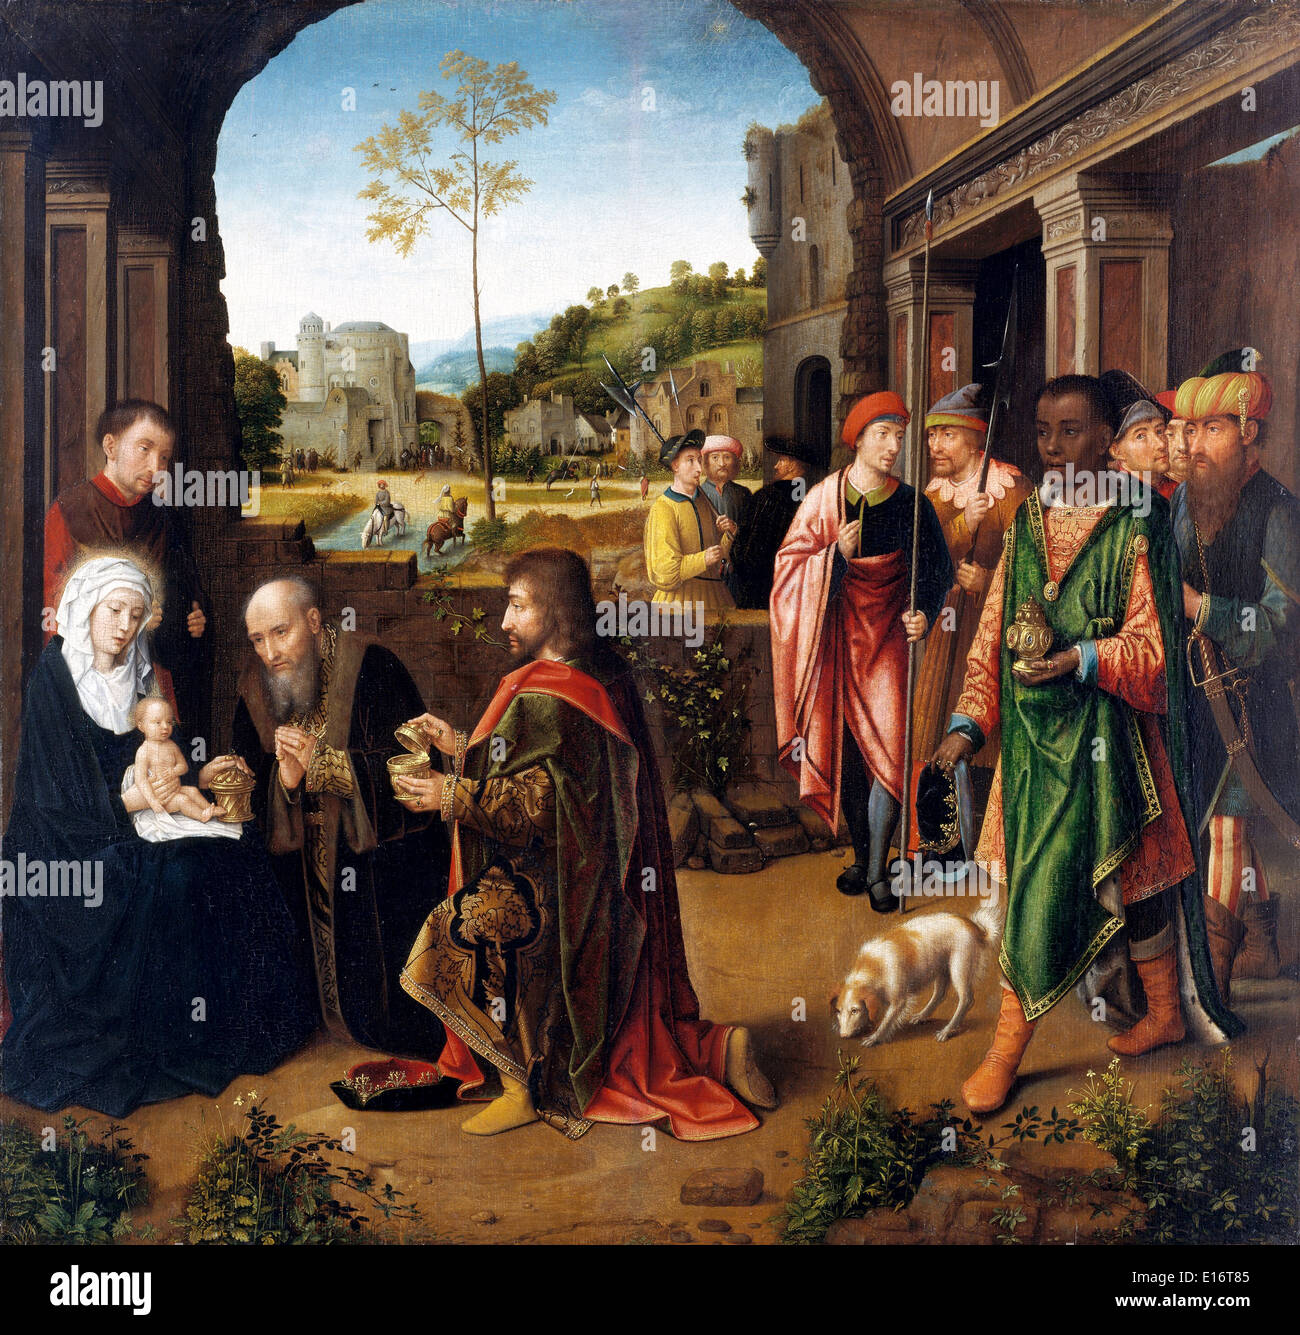 The Adoration of the Magi by Gerard David, 1520 Stock Photo